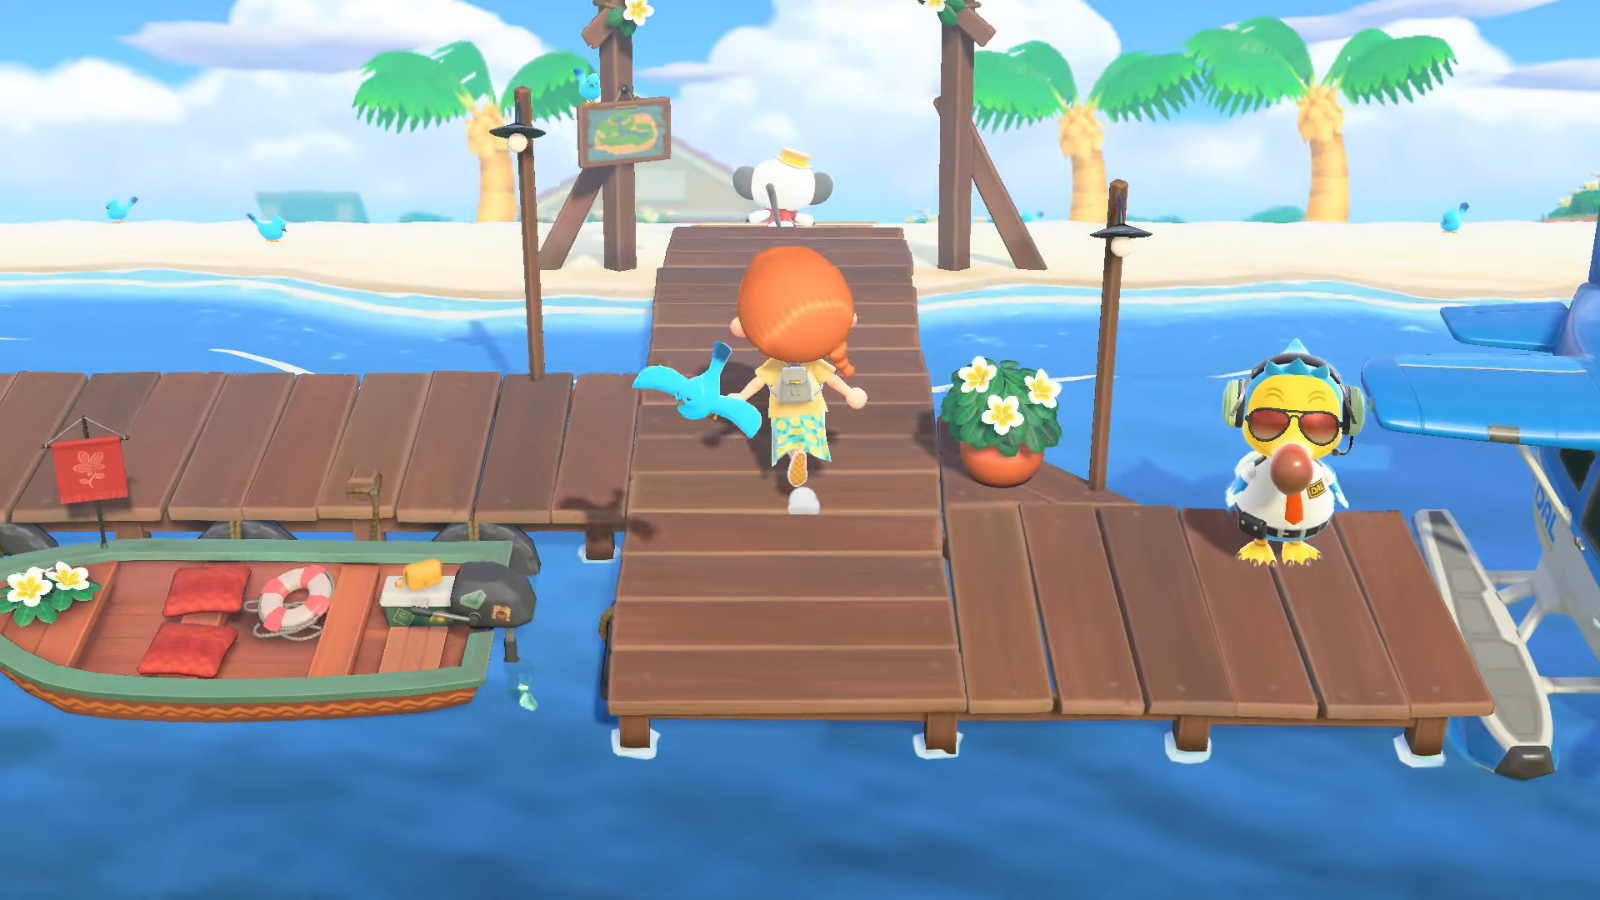 Animal Crossing: Happy Home Paradise's Best New Features